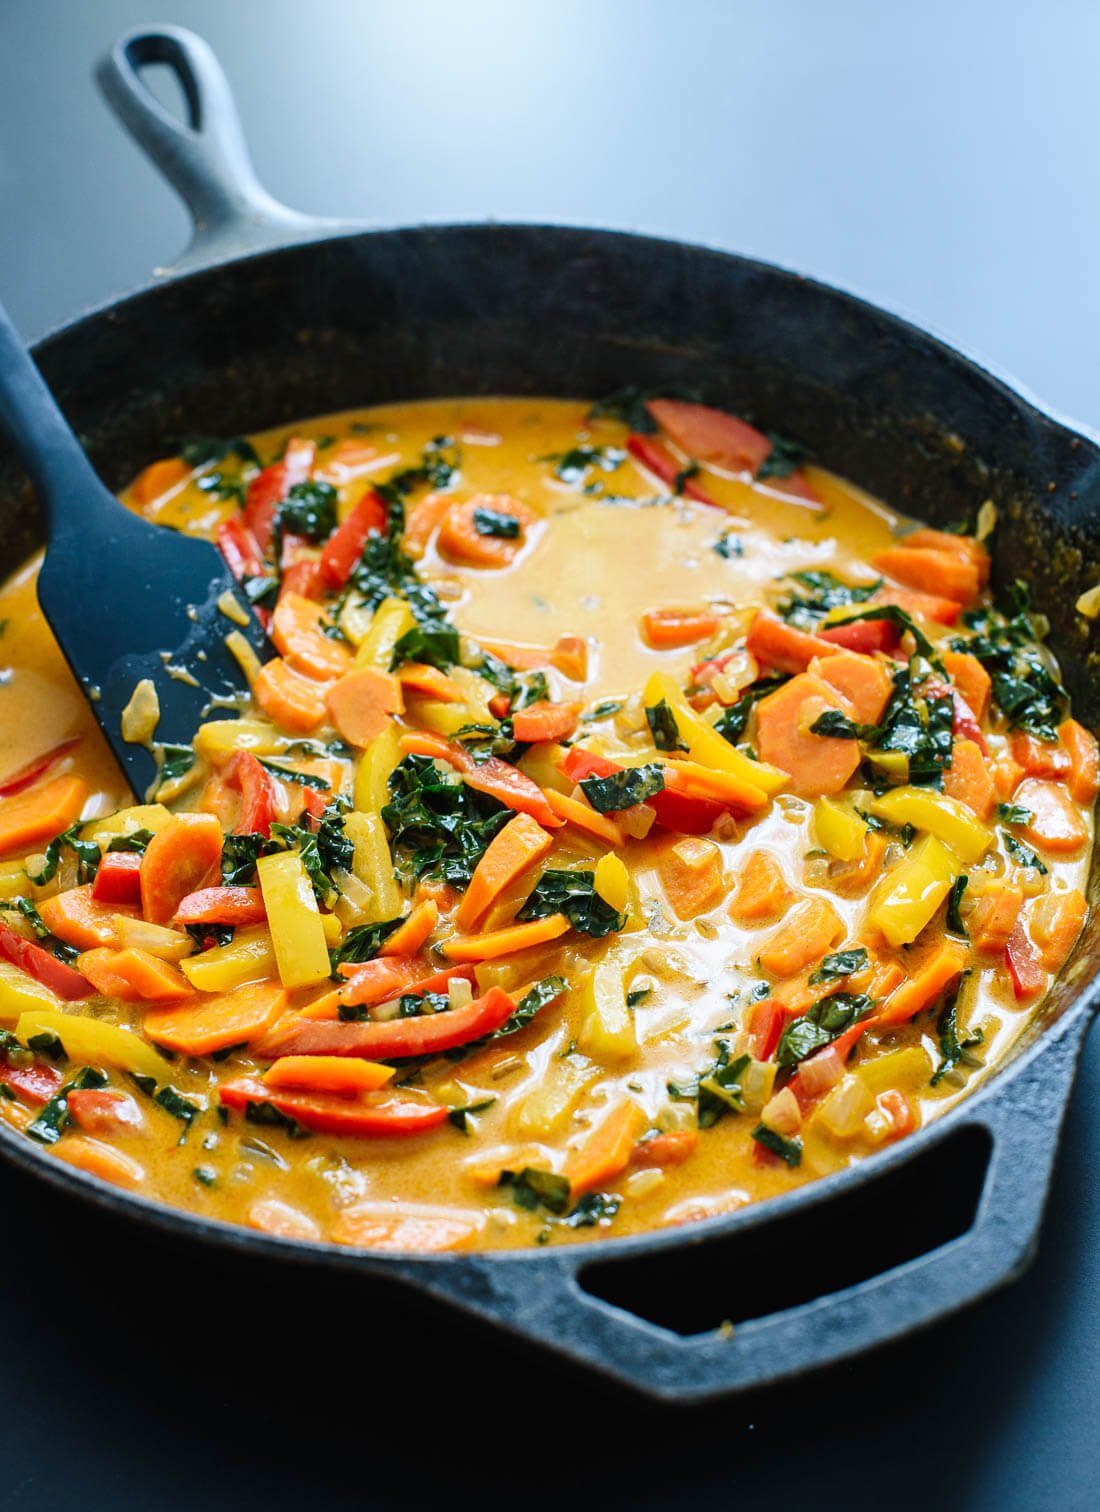 Thai Red Curry Recipe with Vegetables - Cookie and Kate